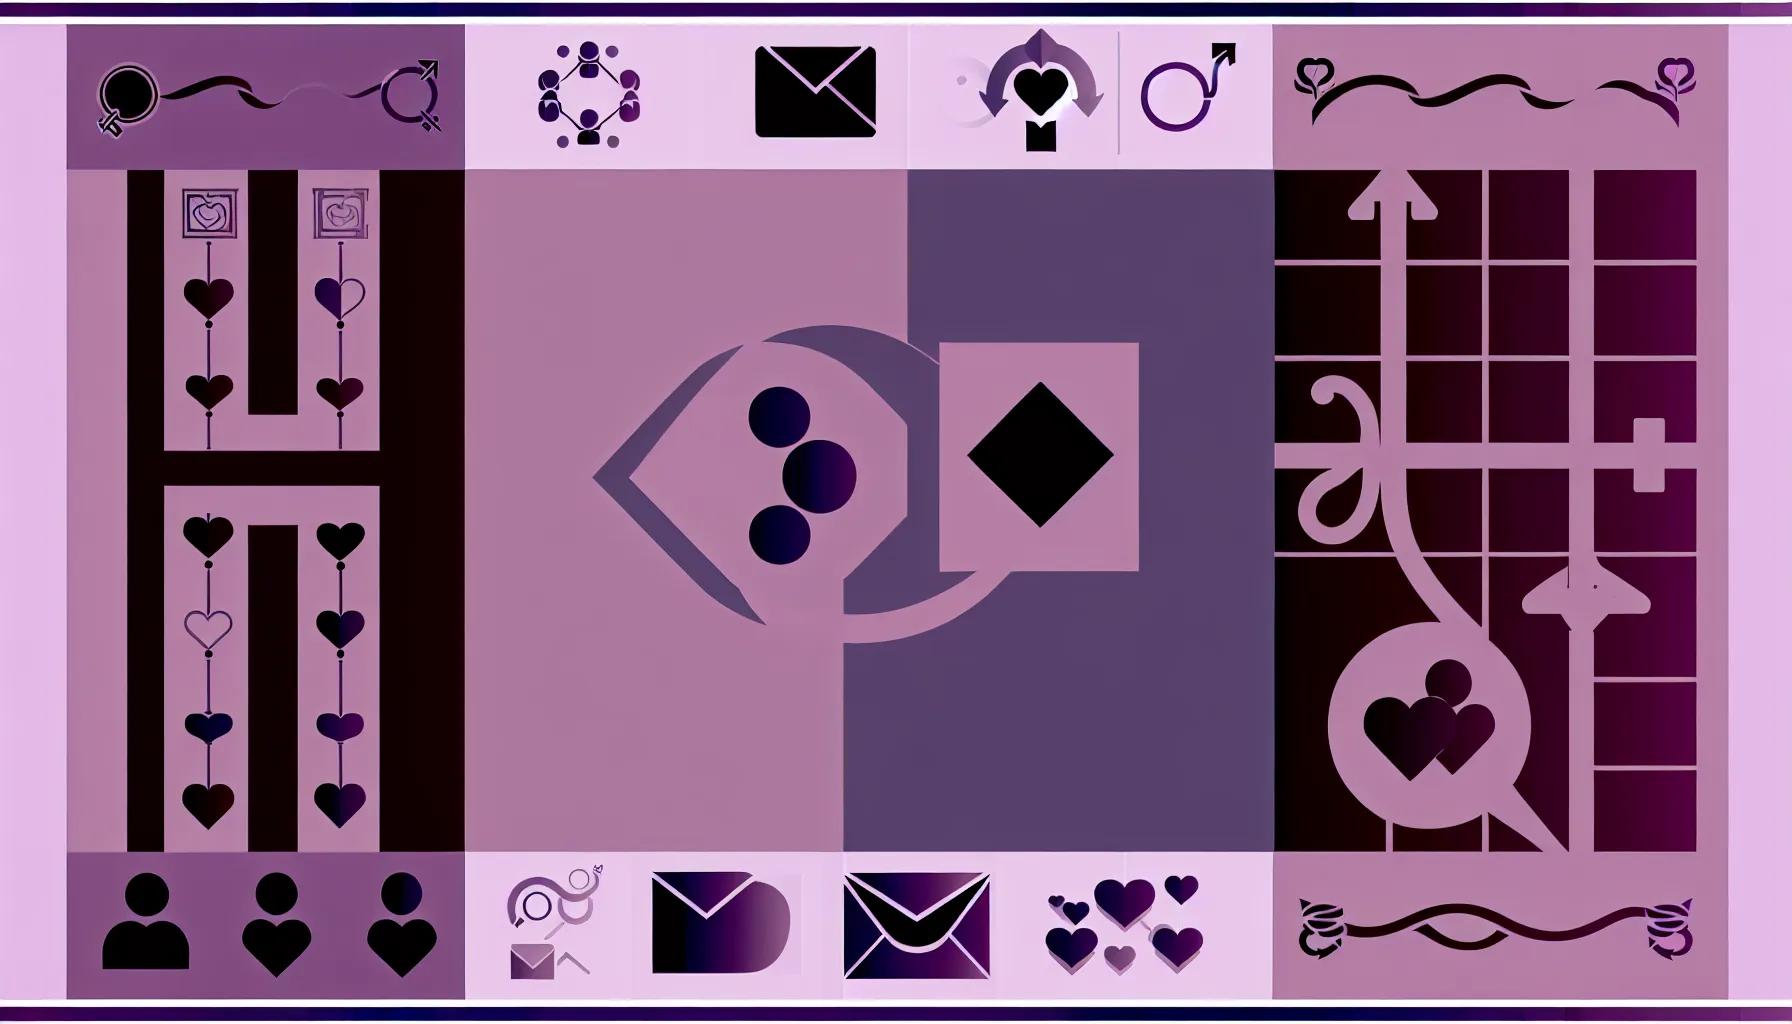 <strong>Whispers Across the Web</strong>: An iconographic dance of digital dialogue on MeetBDSM.com, where every symbol is a heartbeat in the conversation of desire.